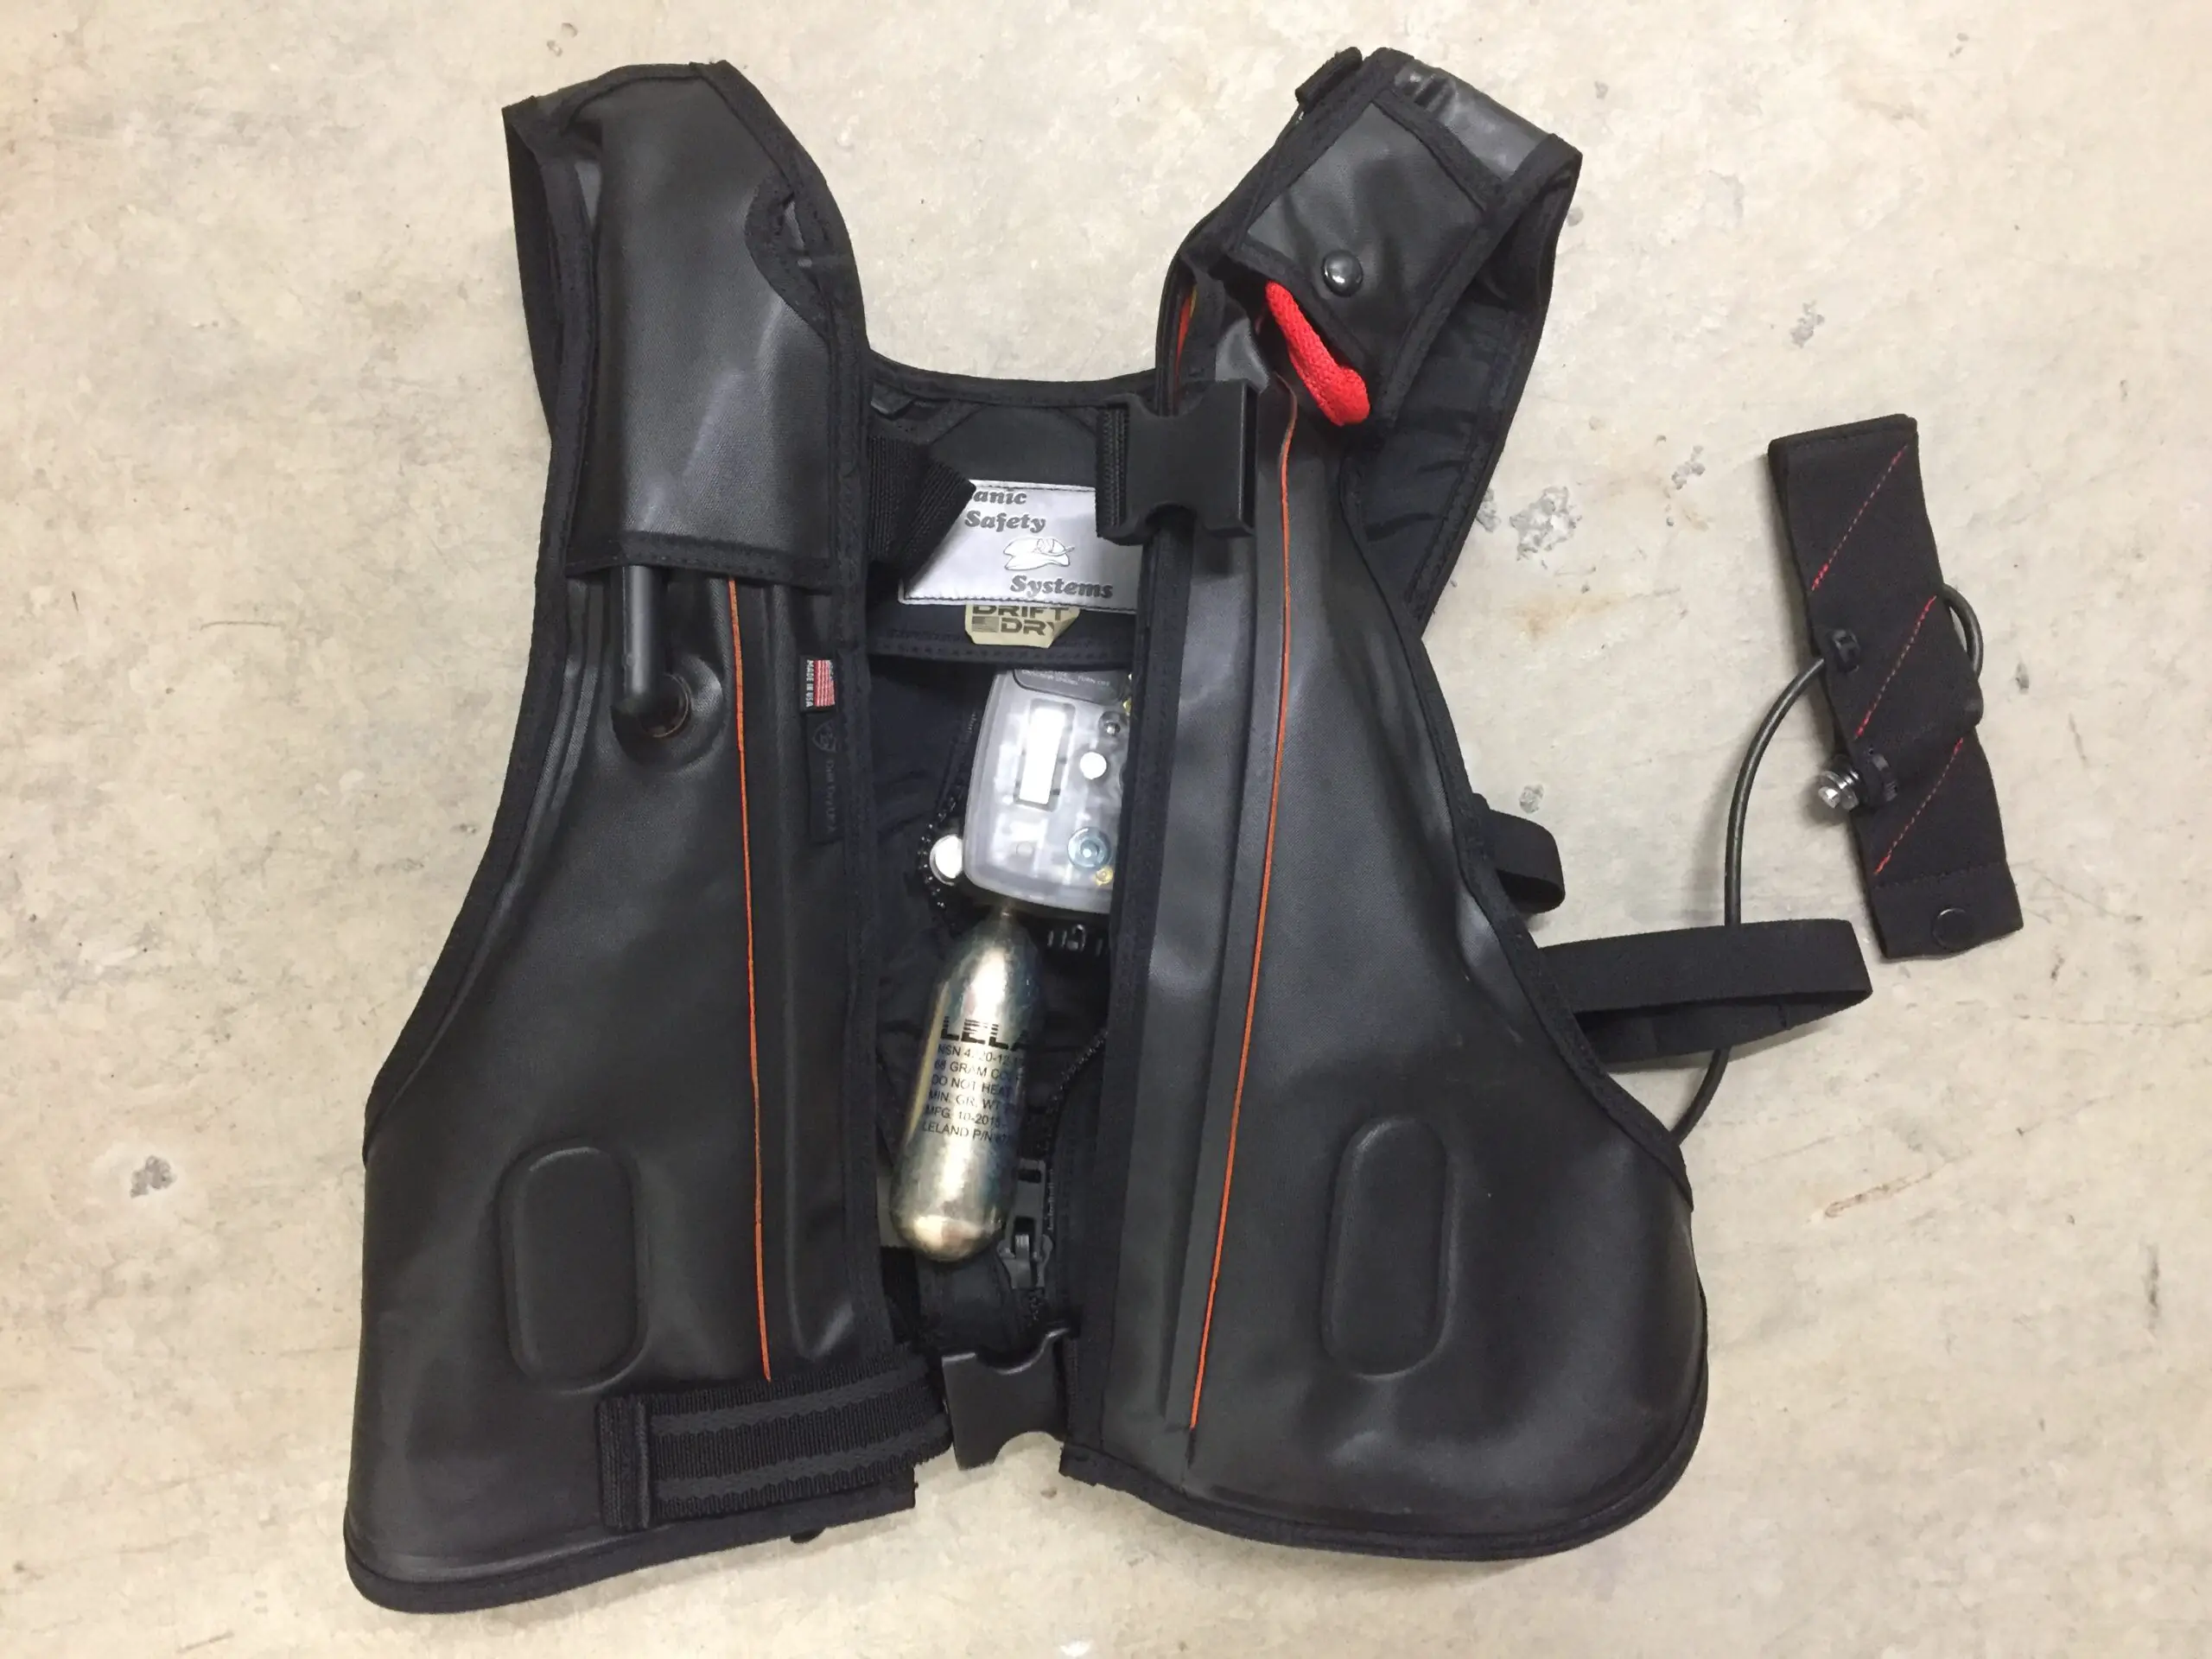 Freediving safety: Freedive Recovery vest review